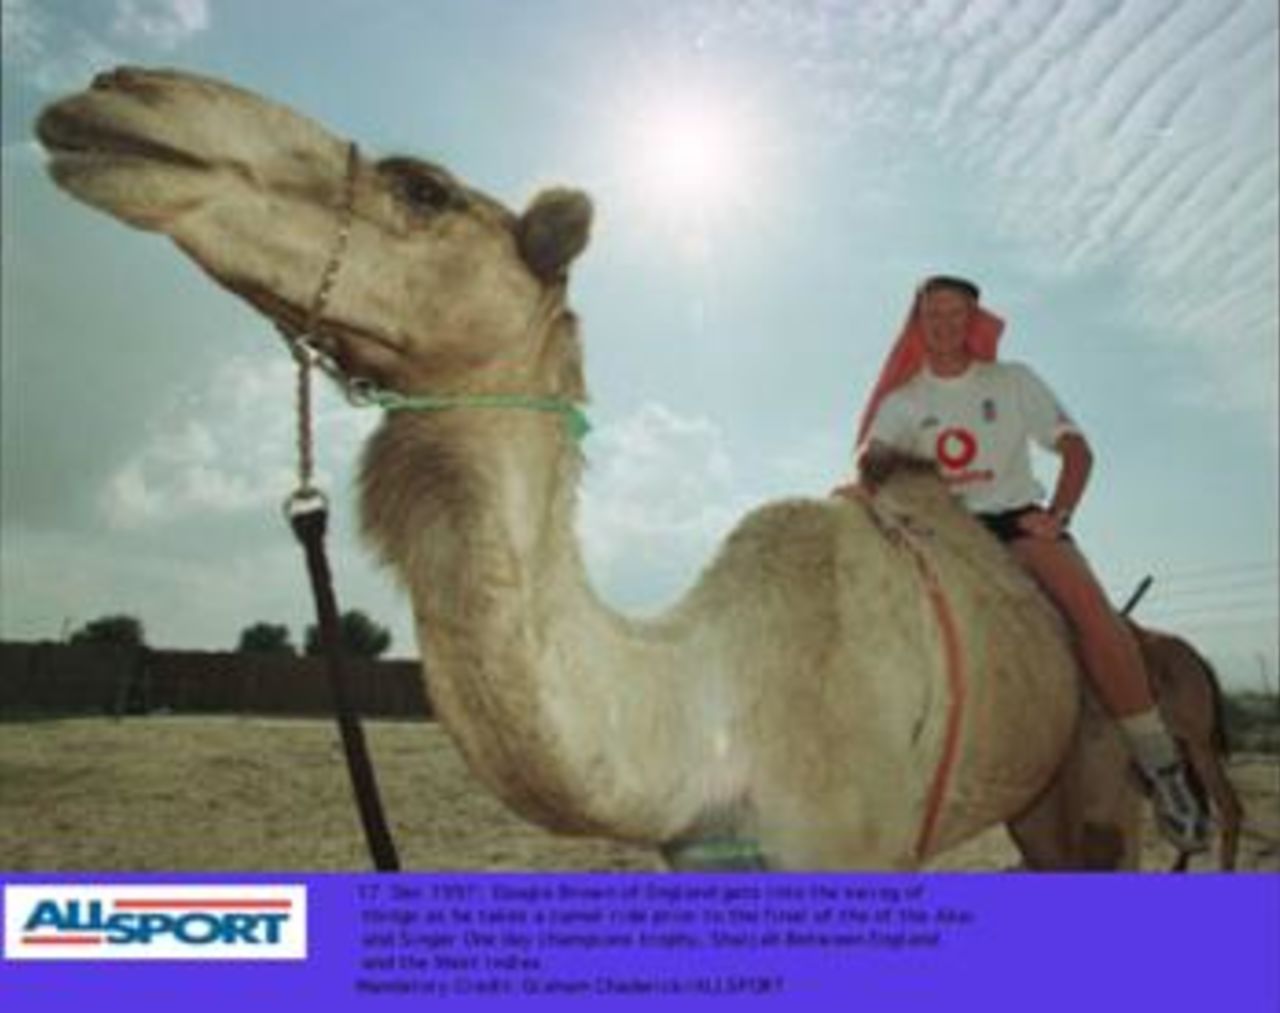 Dec 17 1997, Dougie Brown rides a camel in Sharjah two days before the final of the Champions Trophy when England will play West Indies.